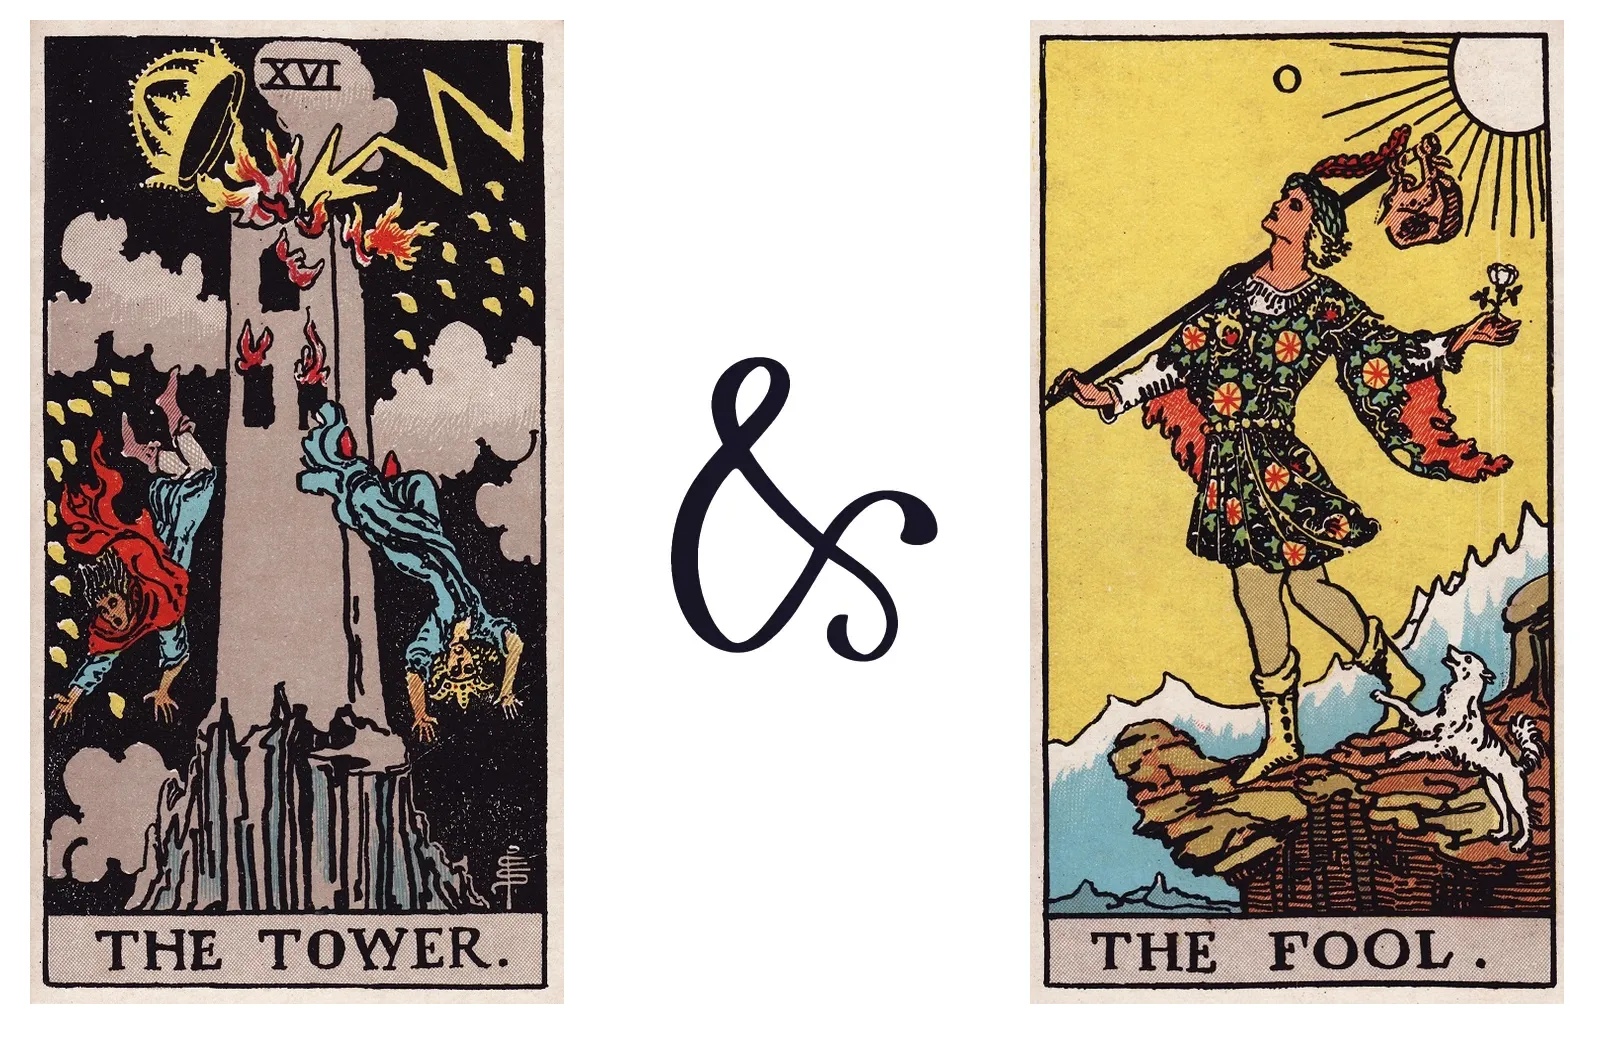 The Tower and The Fool